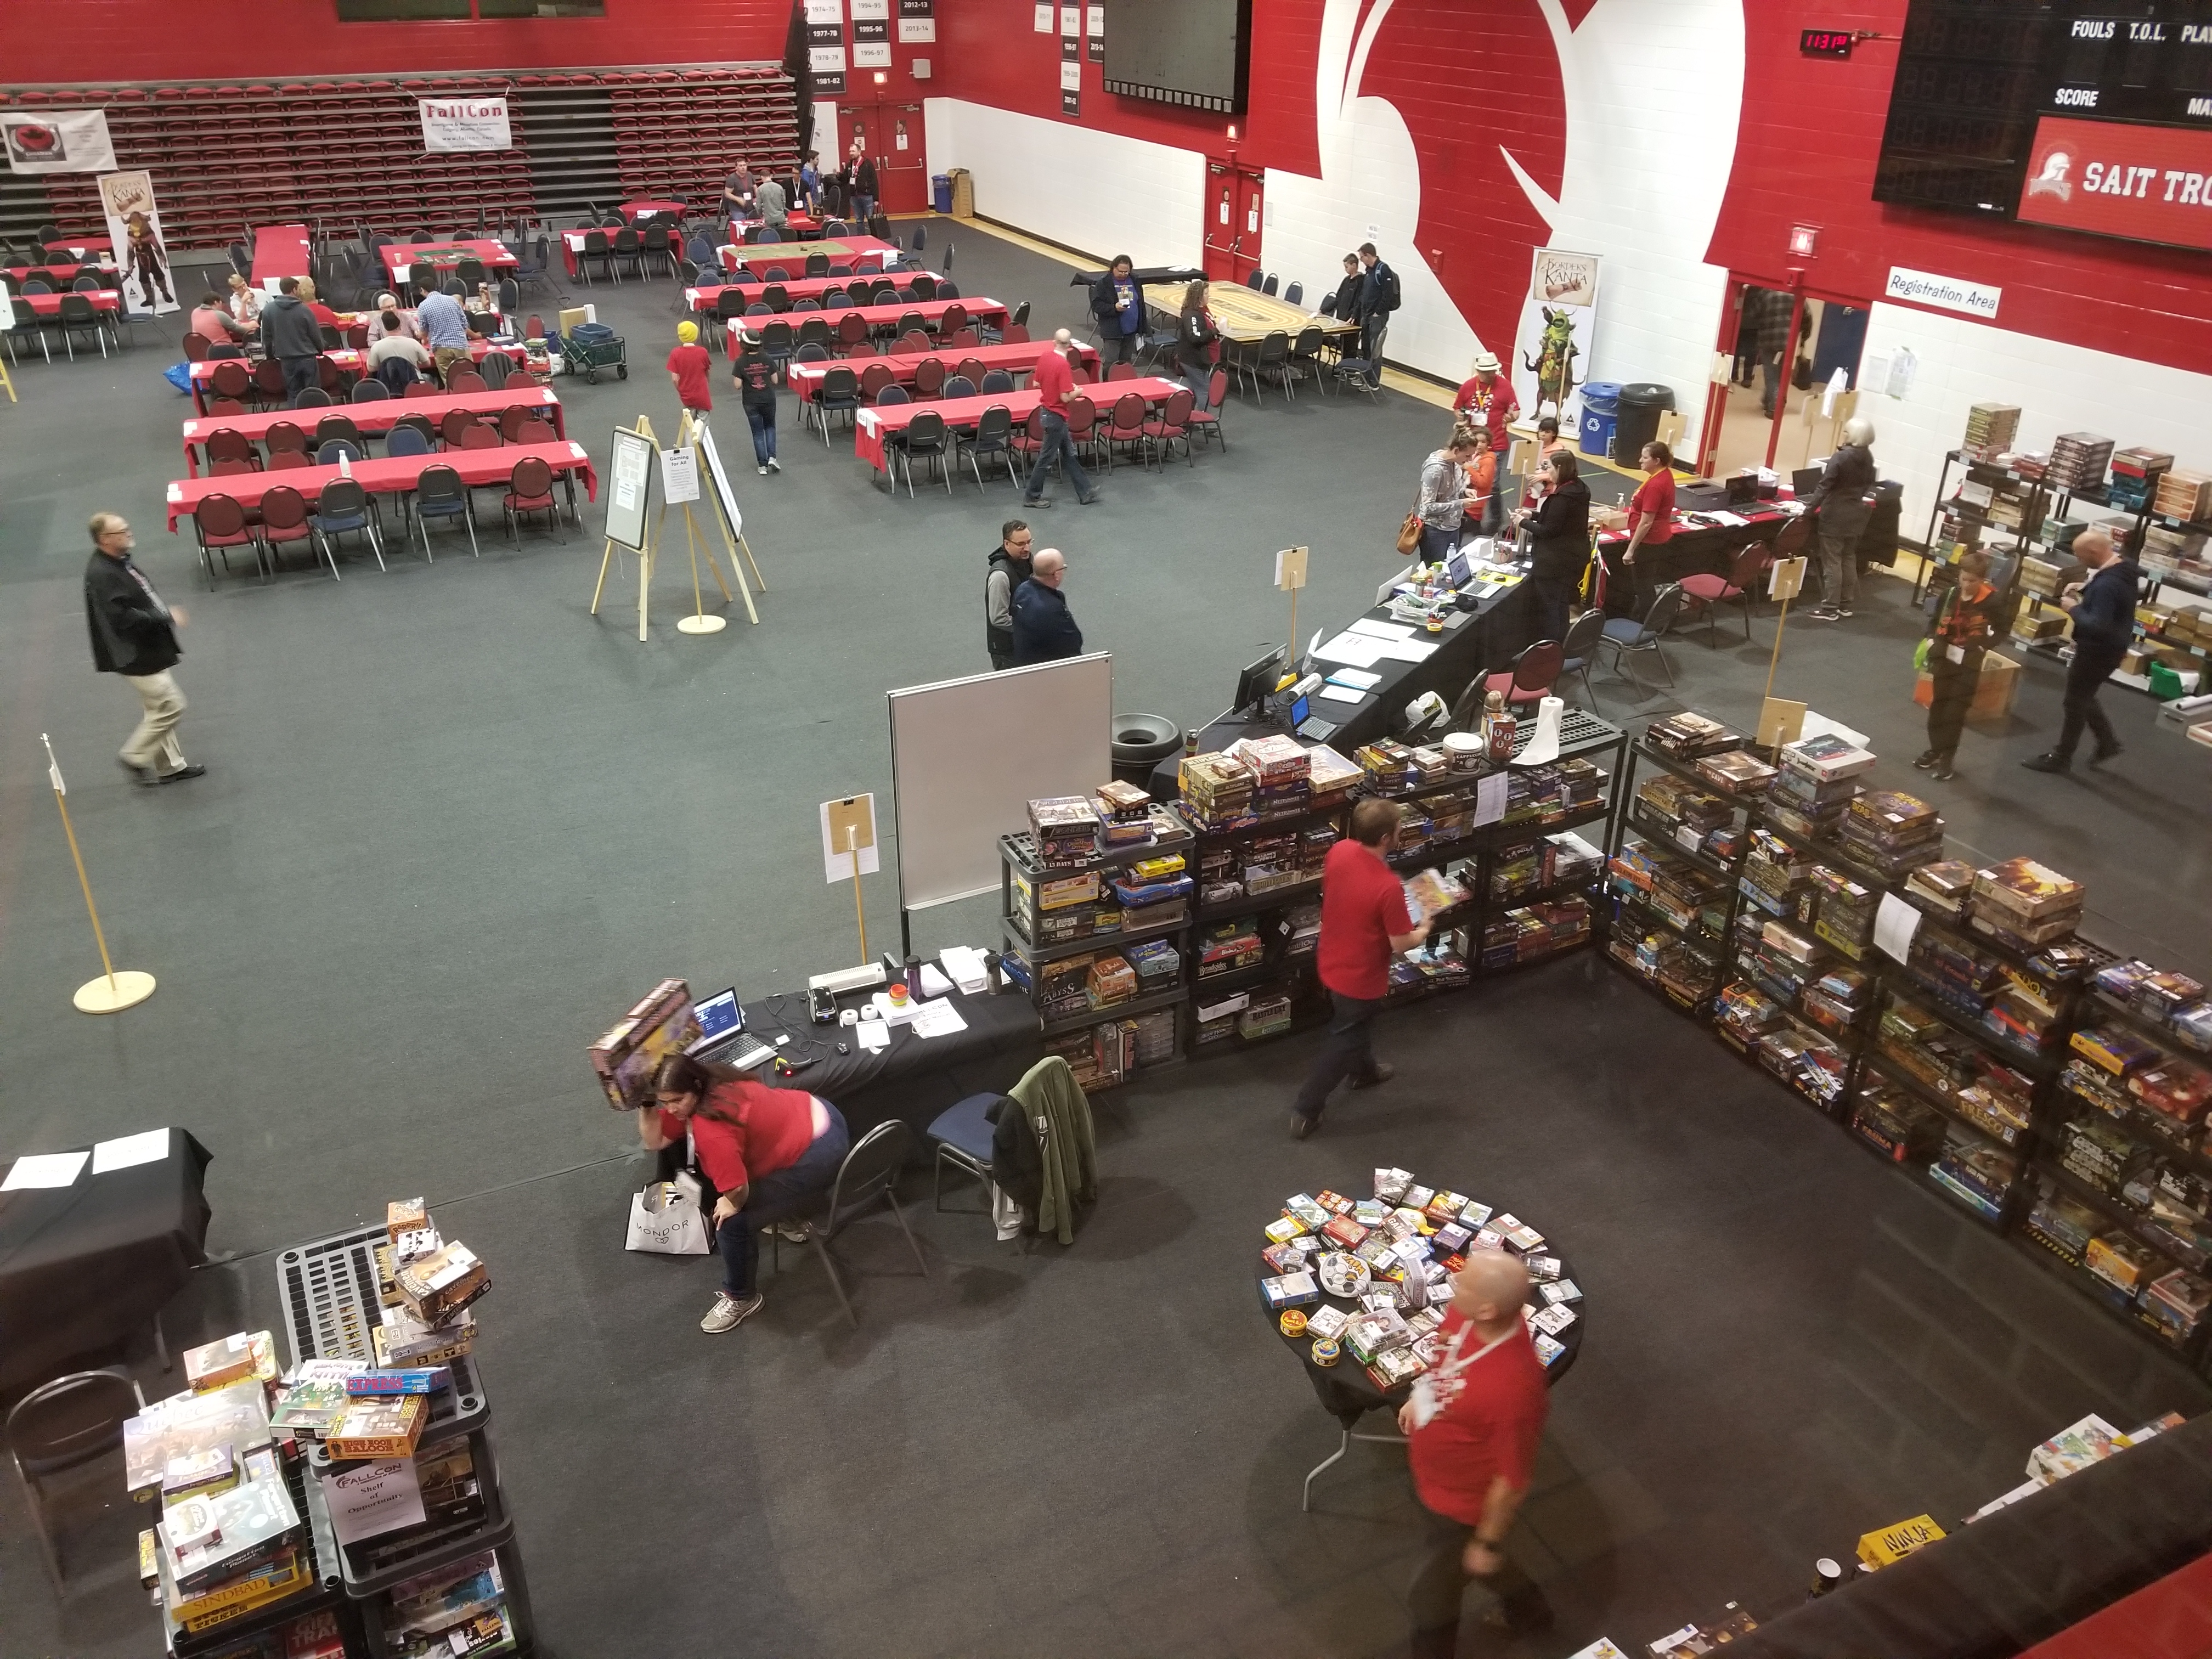 From above: part of the game library